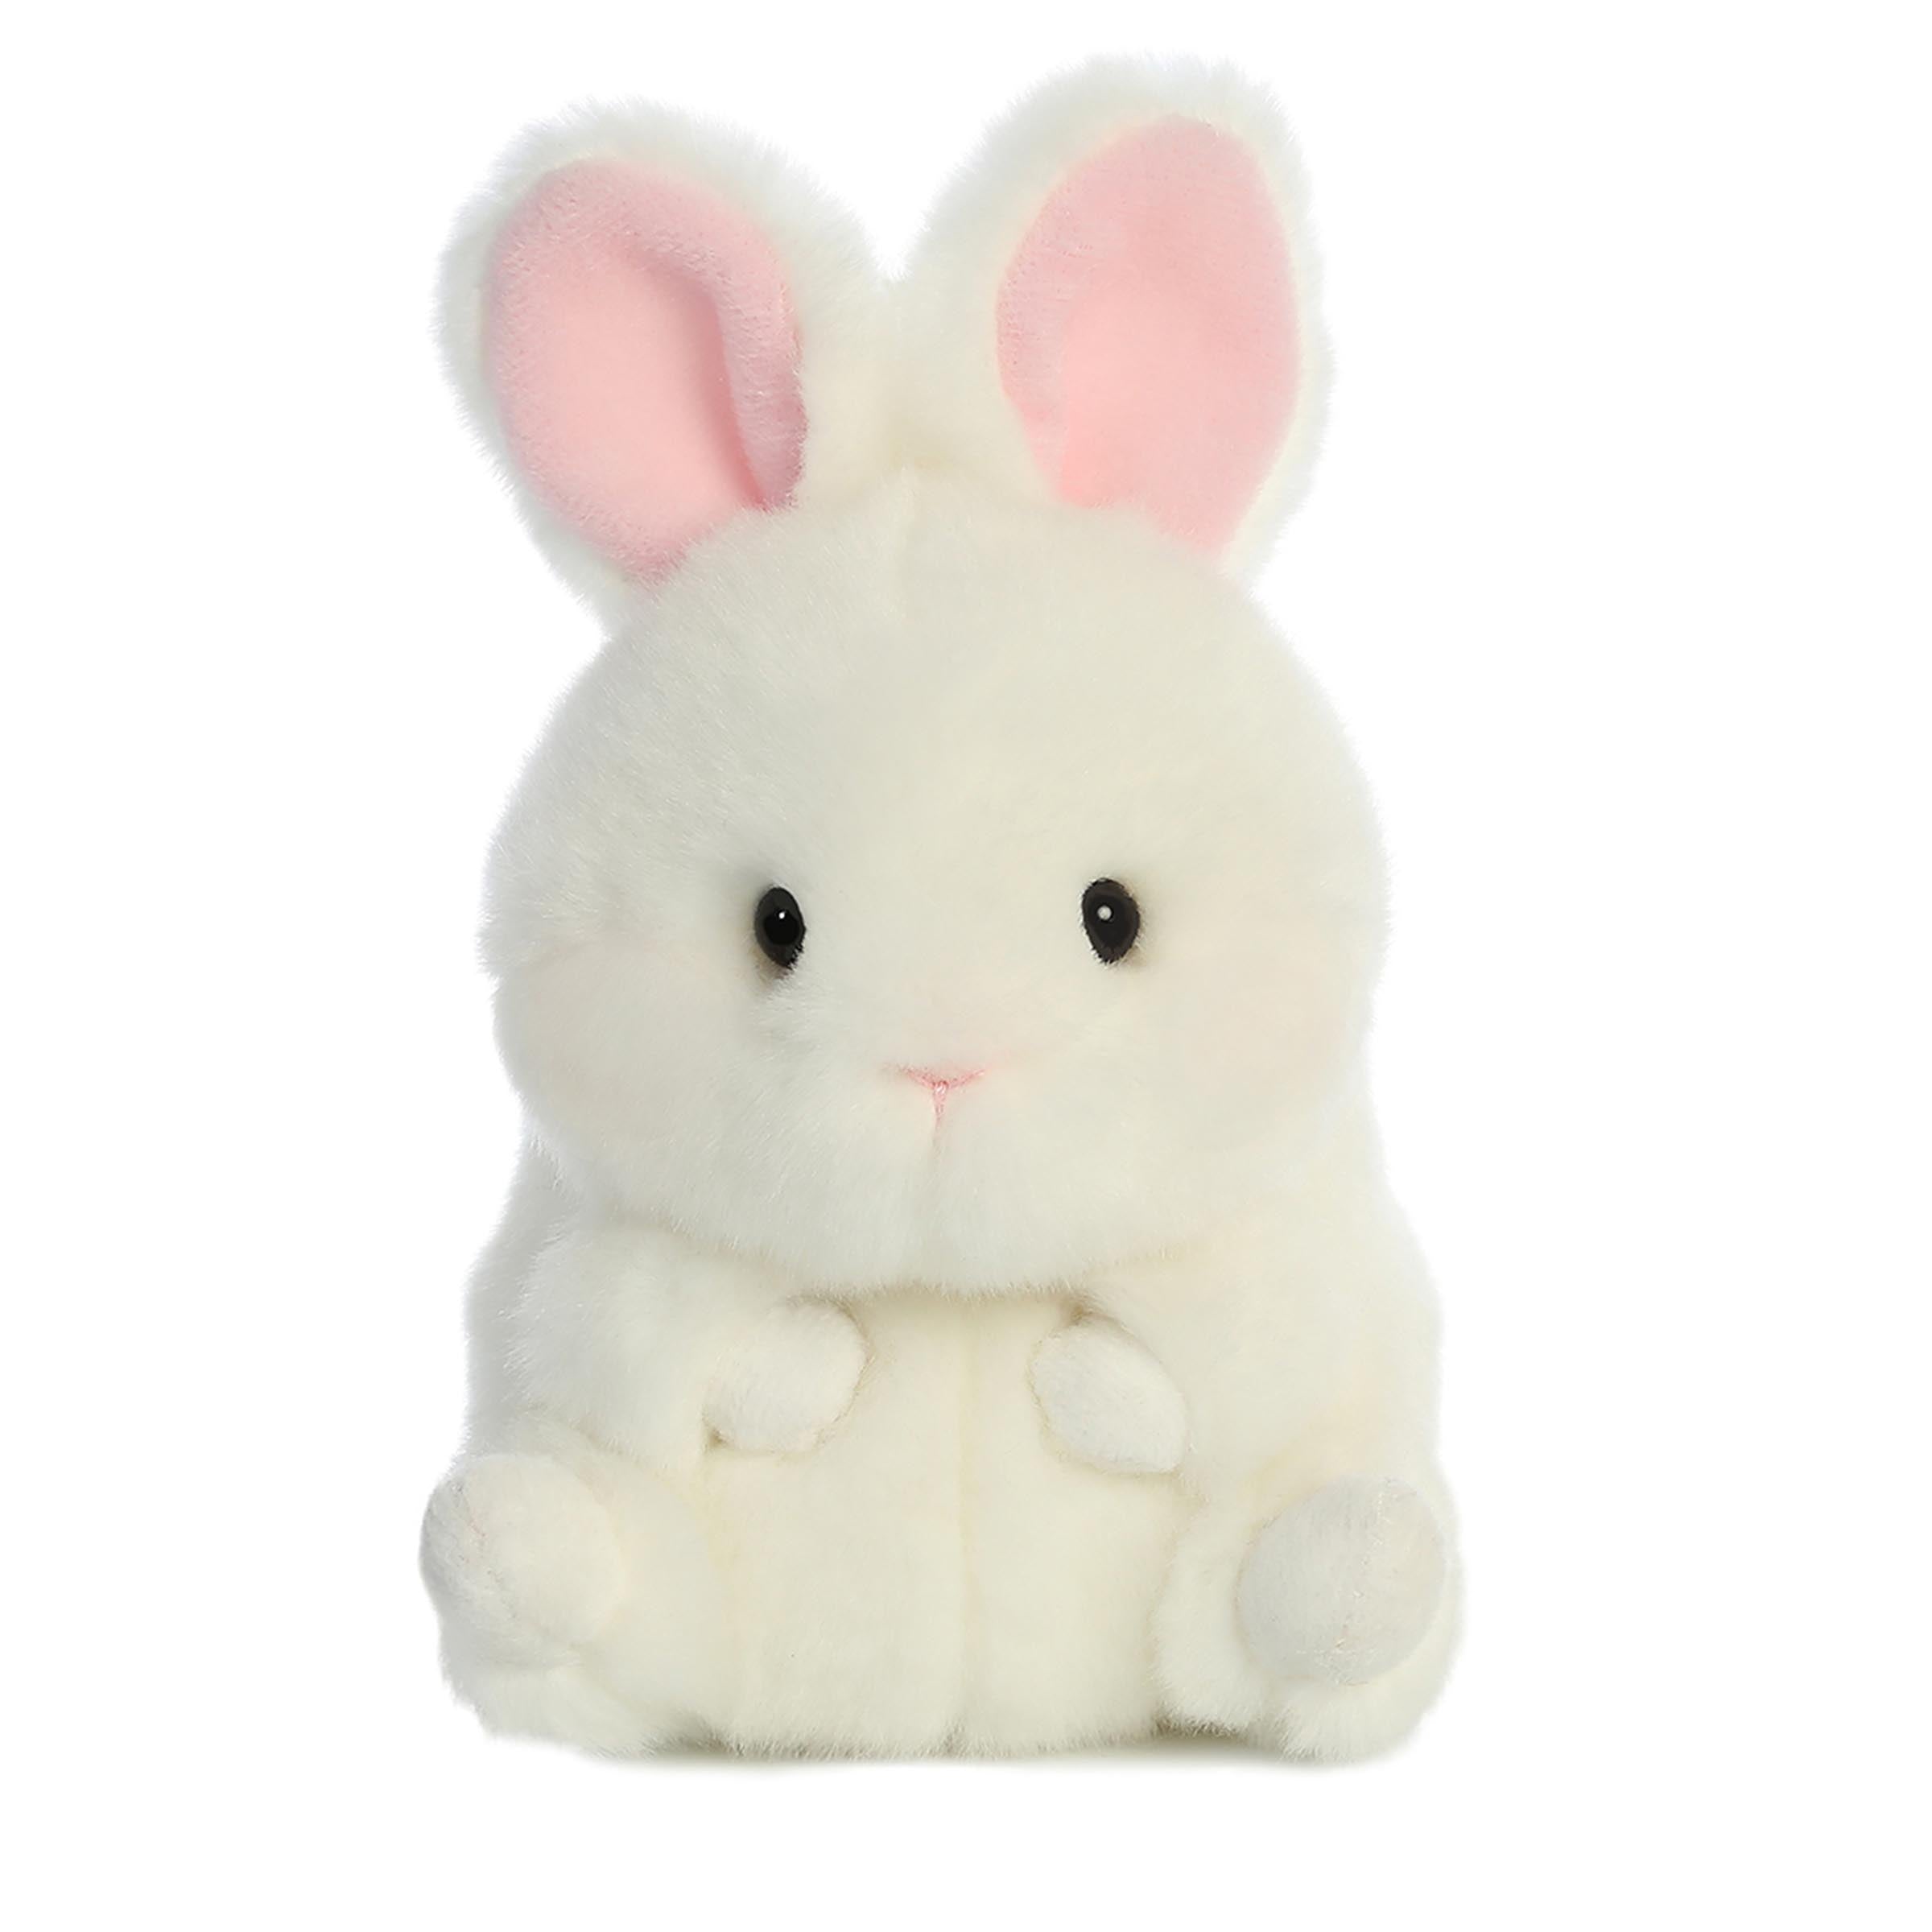 Bunbun Bunny plush from Rolly Pet, featuring a round, soft white body and pink inner ears